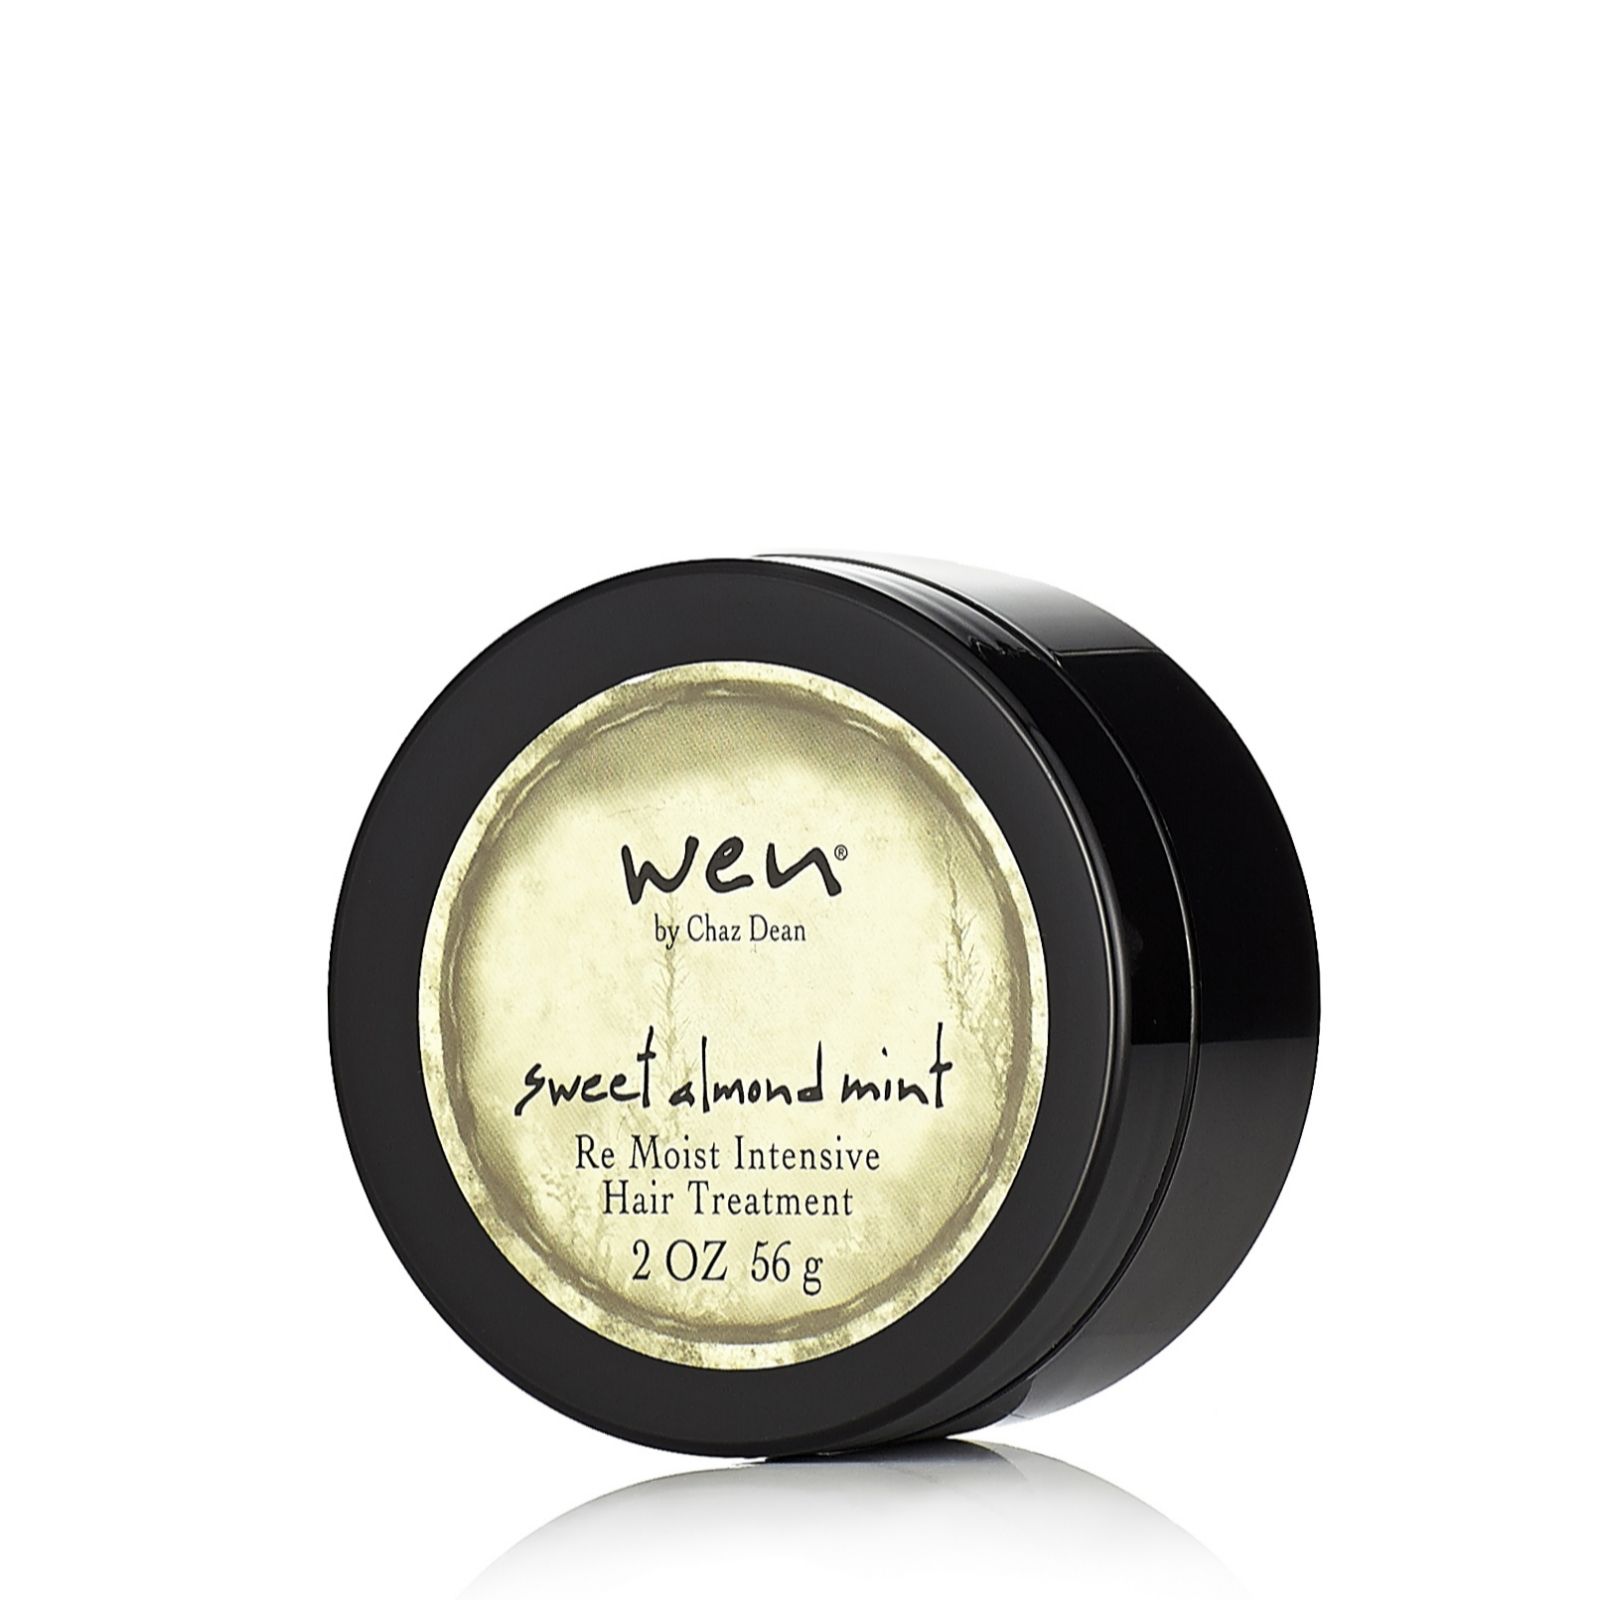 What Is The Return Address For WEN Hair Care Products?